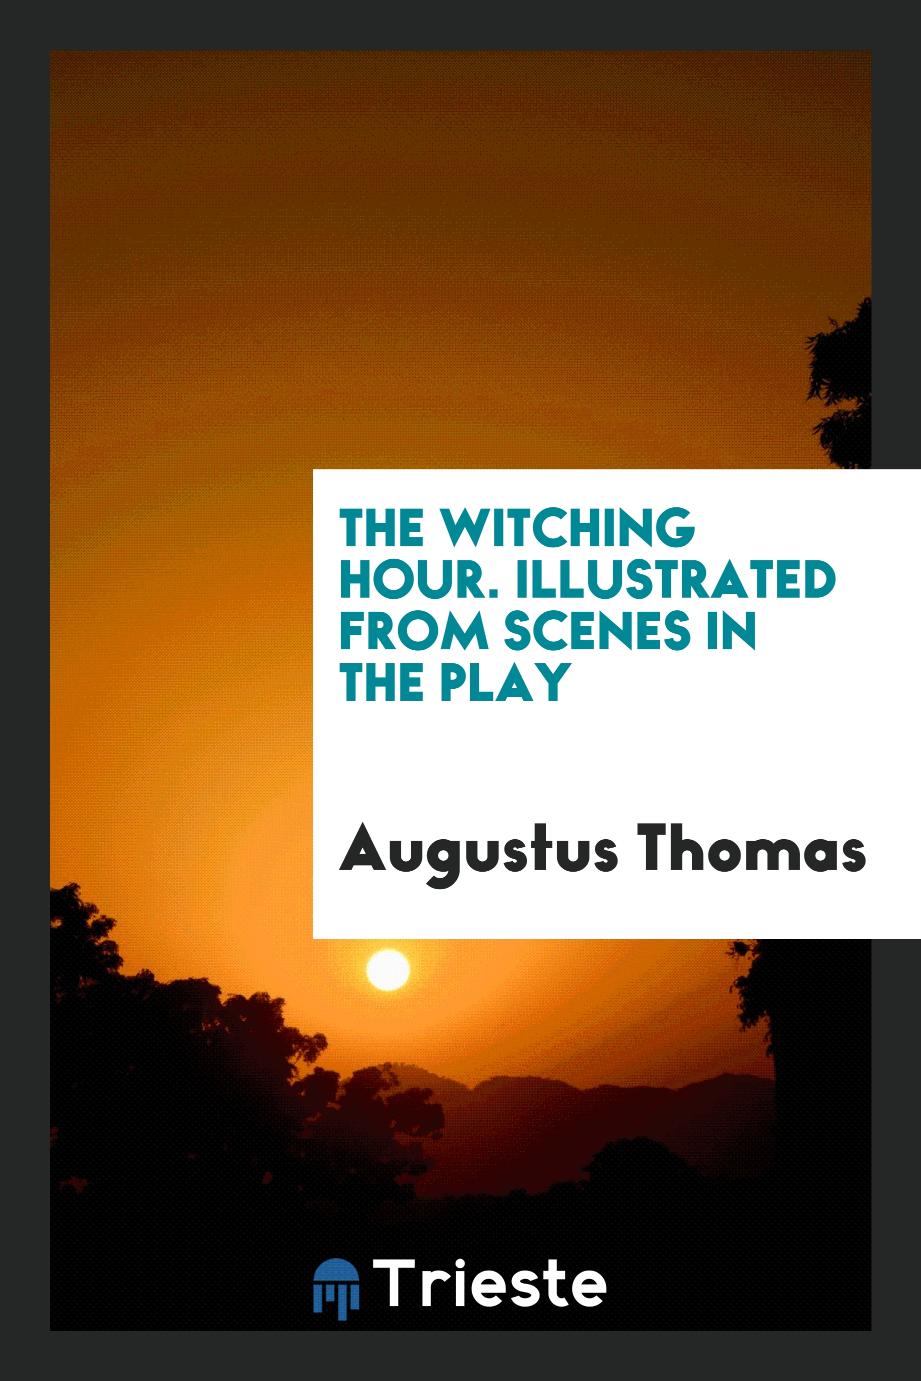 The witching hour. Illustrated from scenes in the play